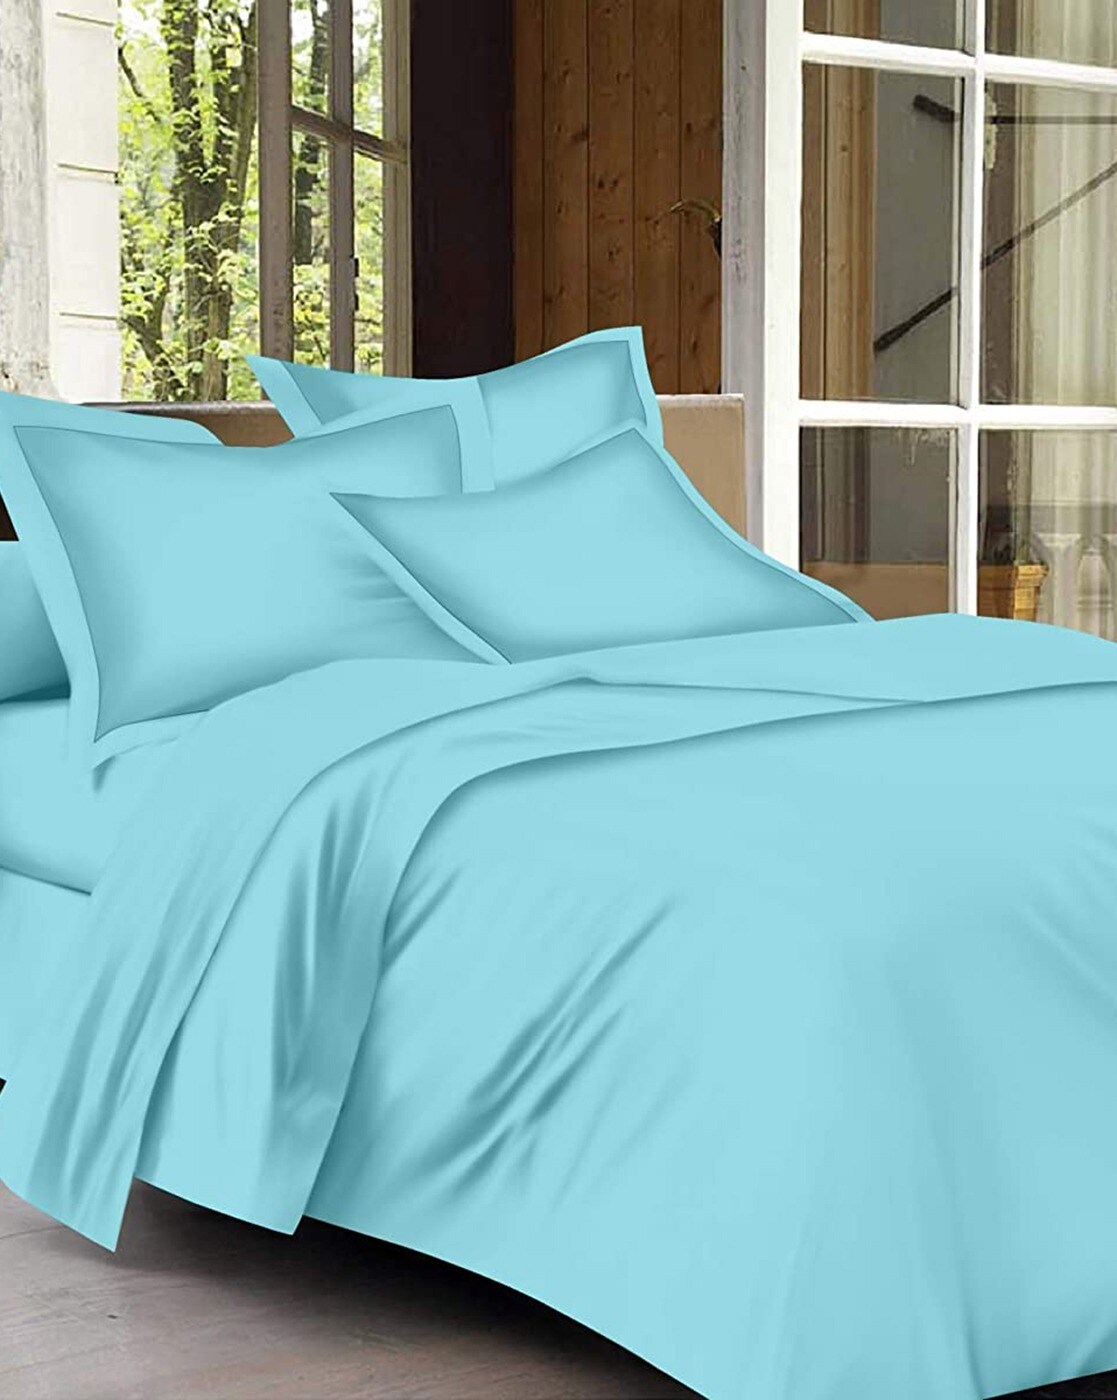 Sky Blue Bedsheets For Home, Queen Size Fitted Bed Sheets India